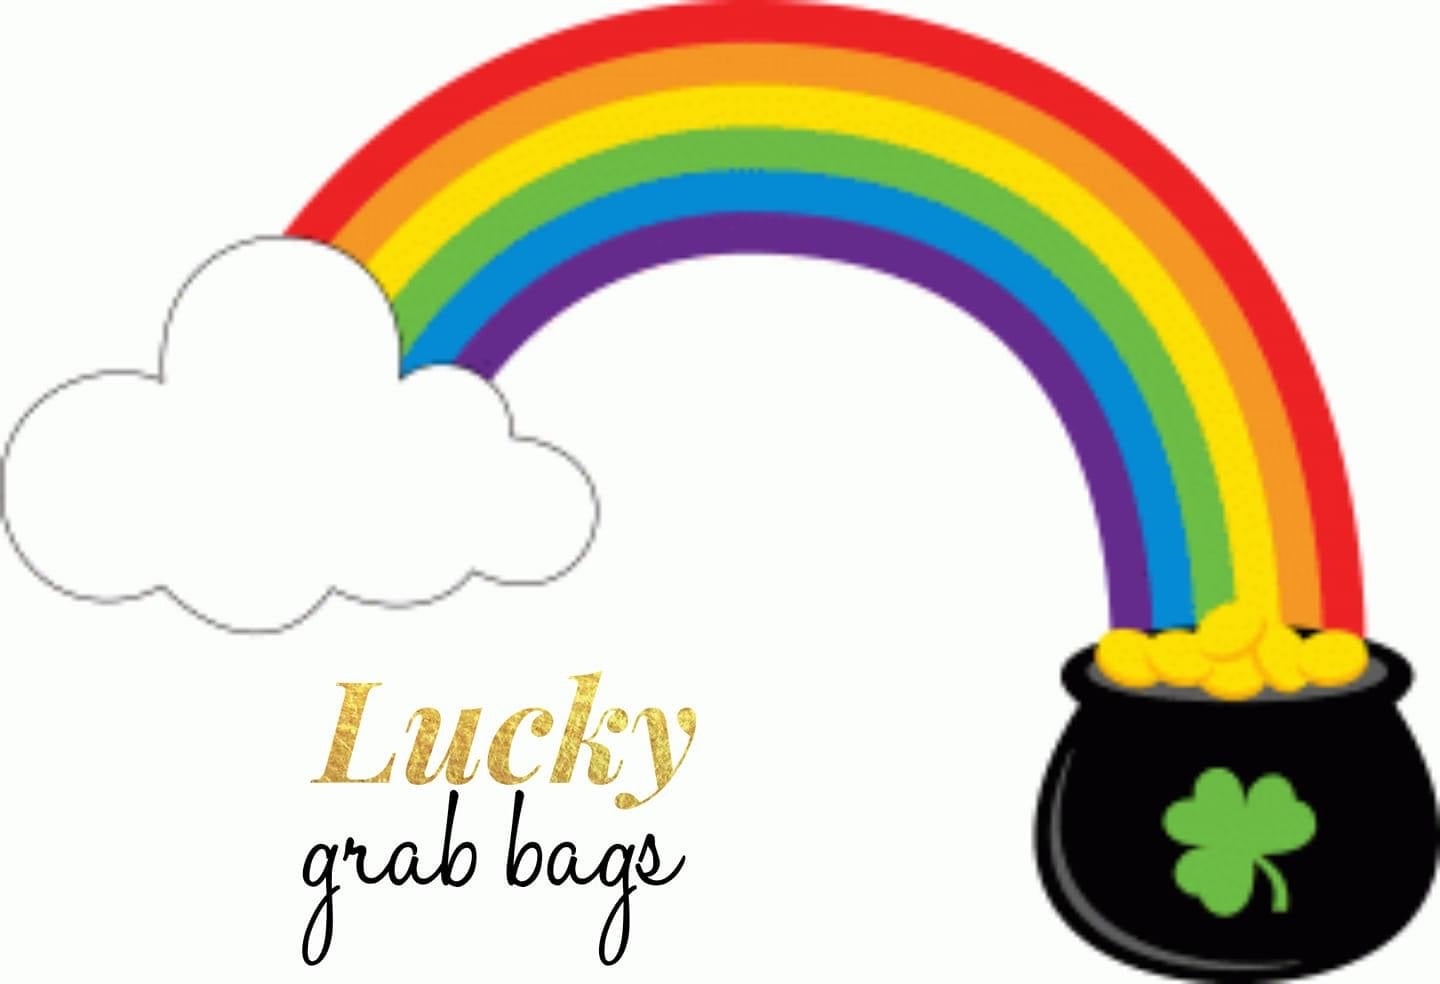 Lucky grab bags